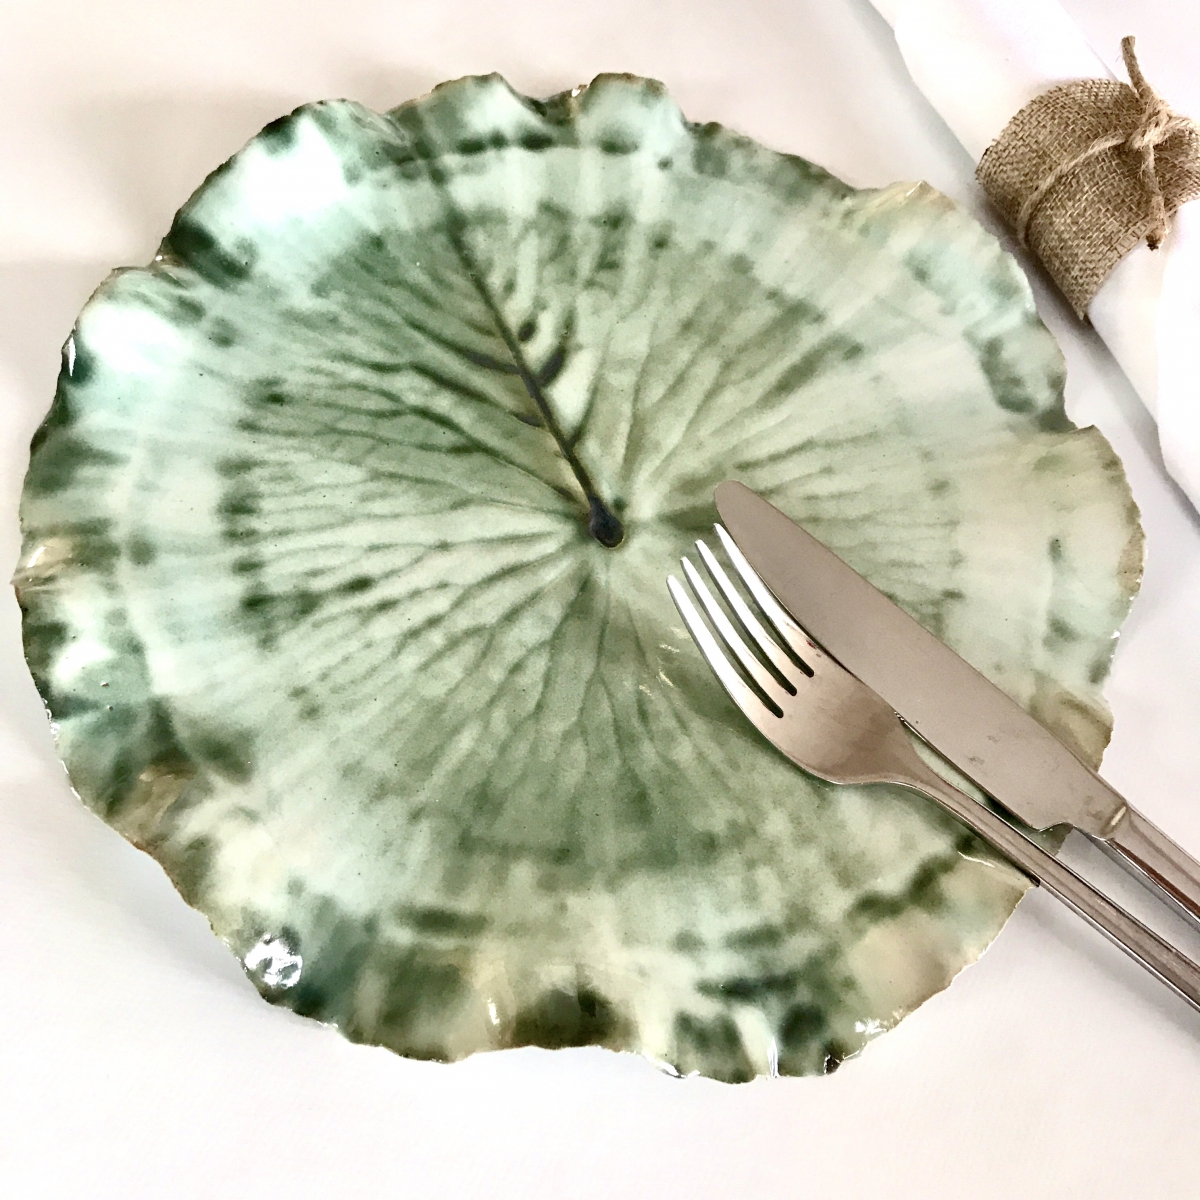 Pond Lily Leaf Dinner Plate by Ceramics Inspired by Nature